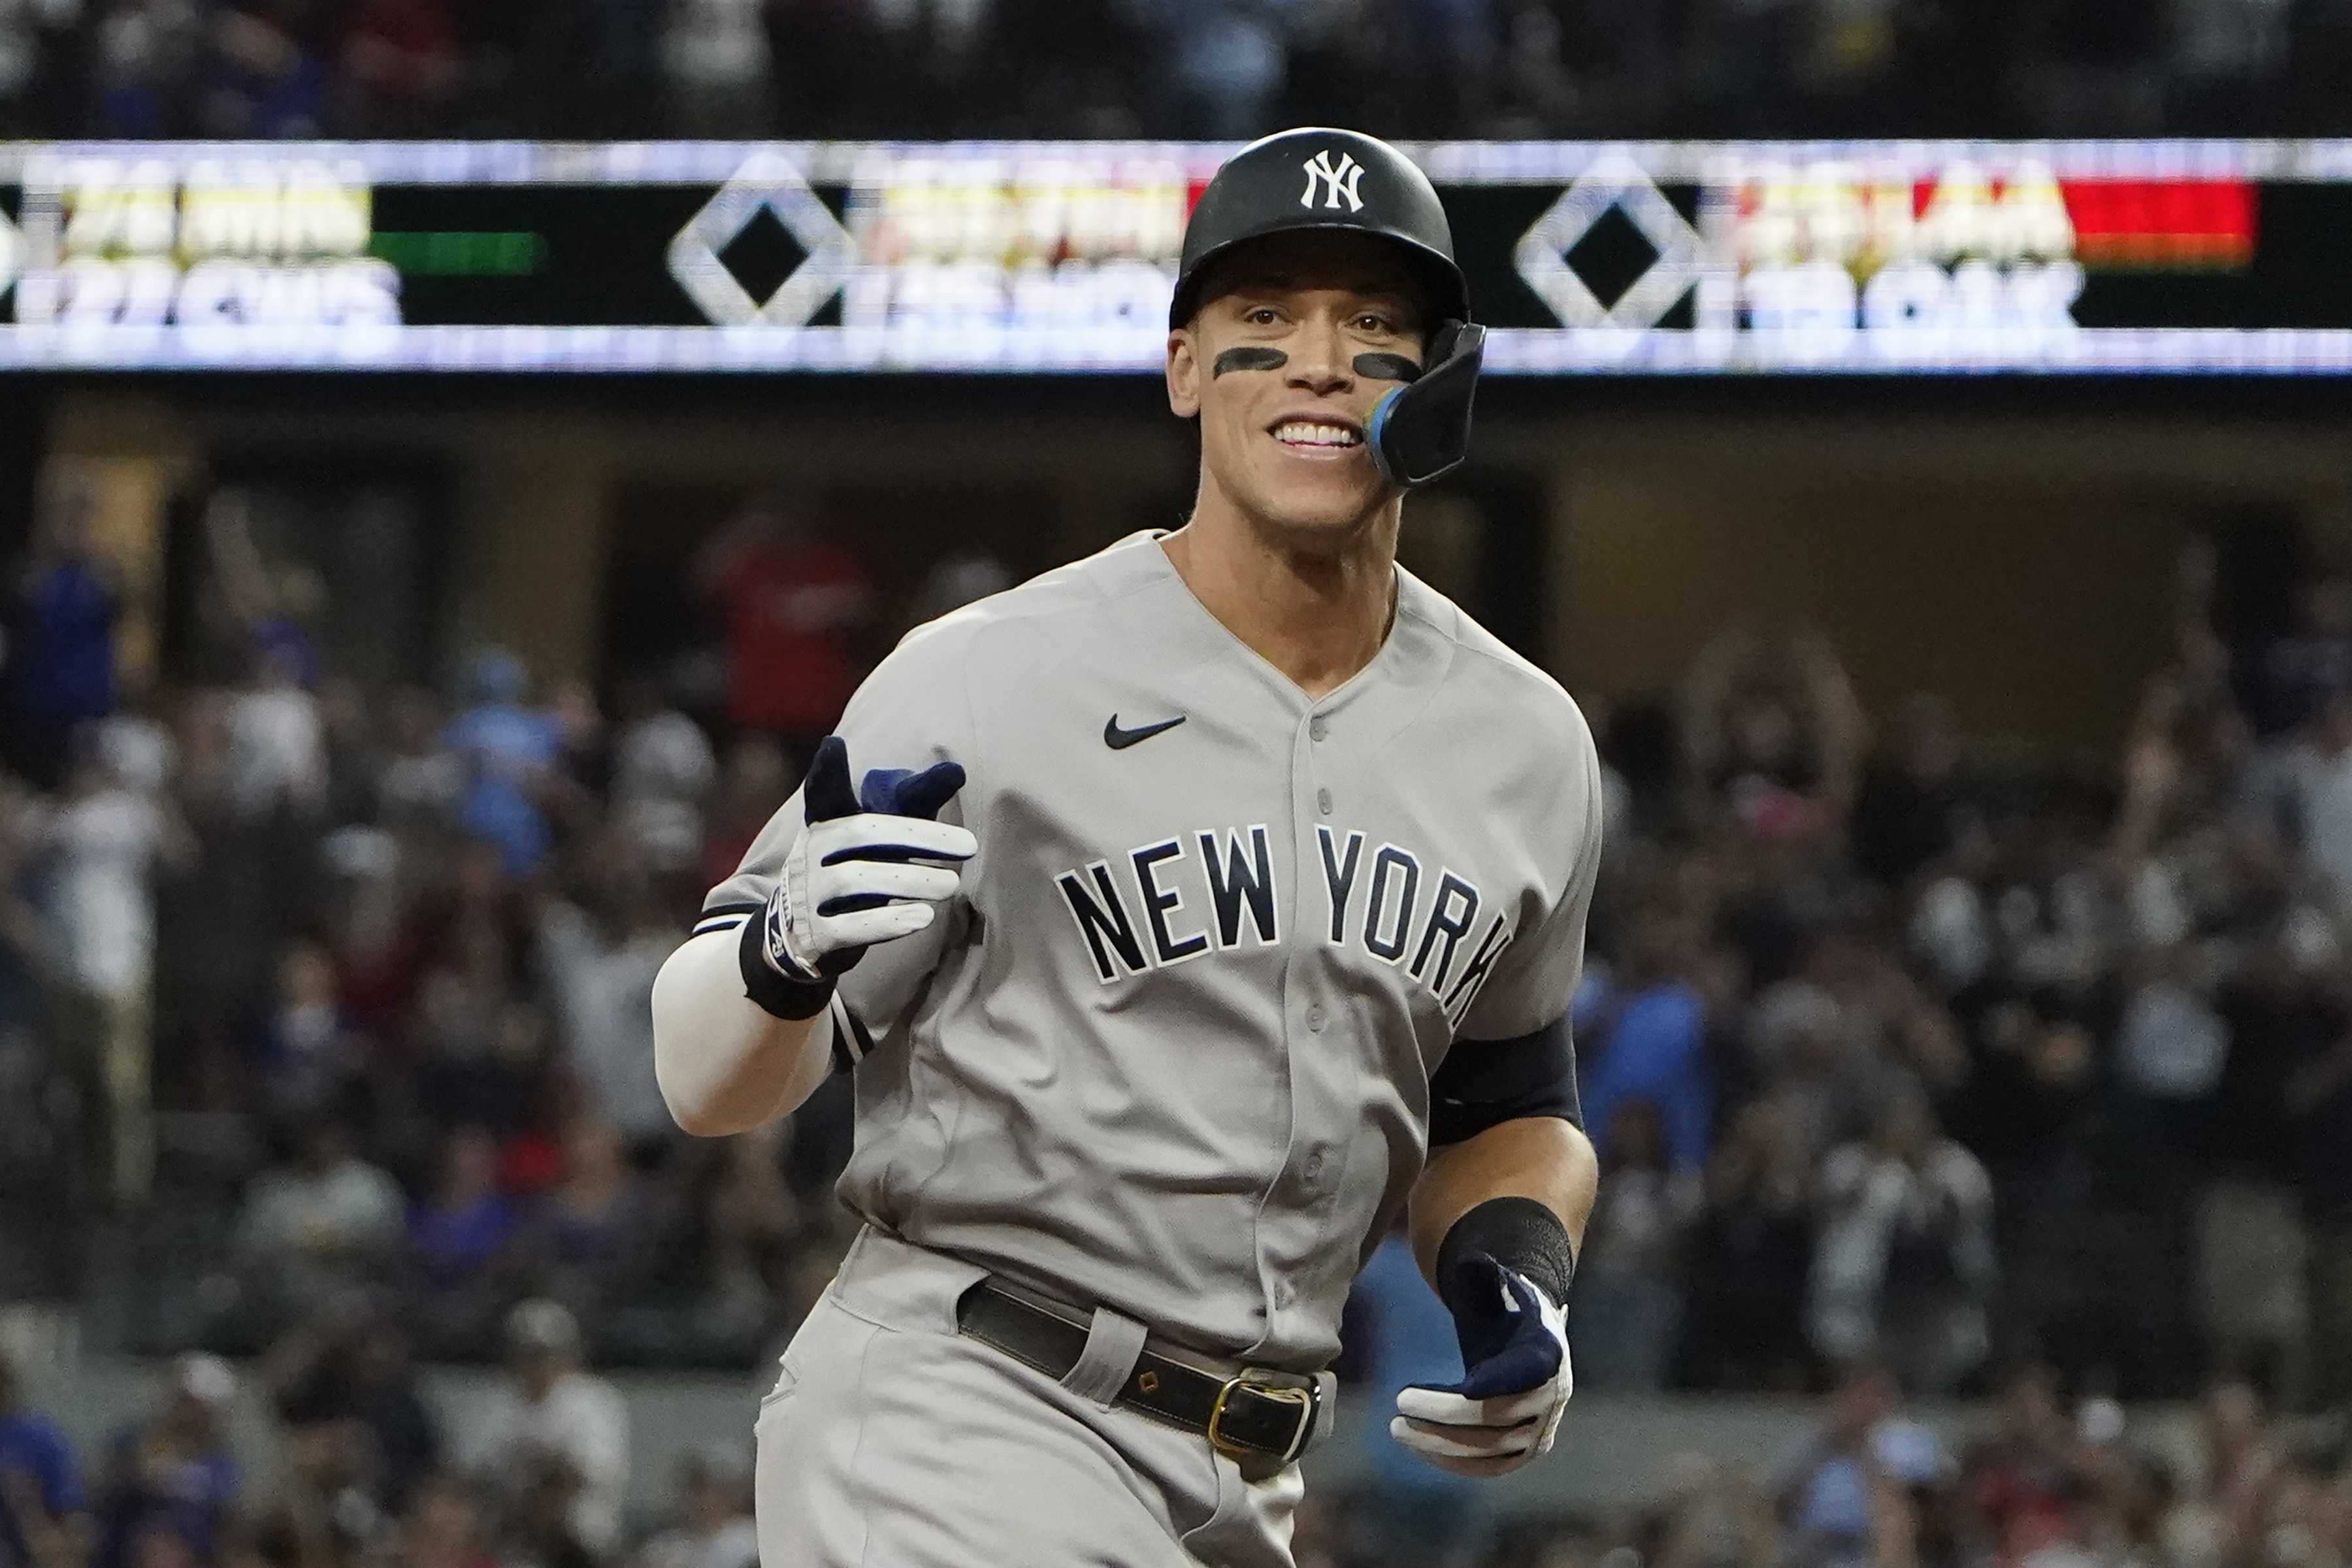 Barry Bonds on Aaron Judge Home Run Record Chase: 'Go for It